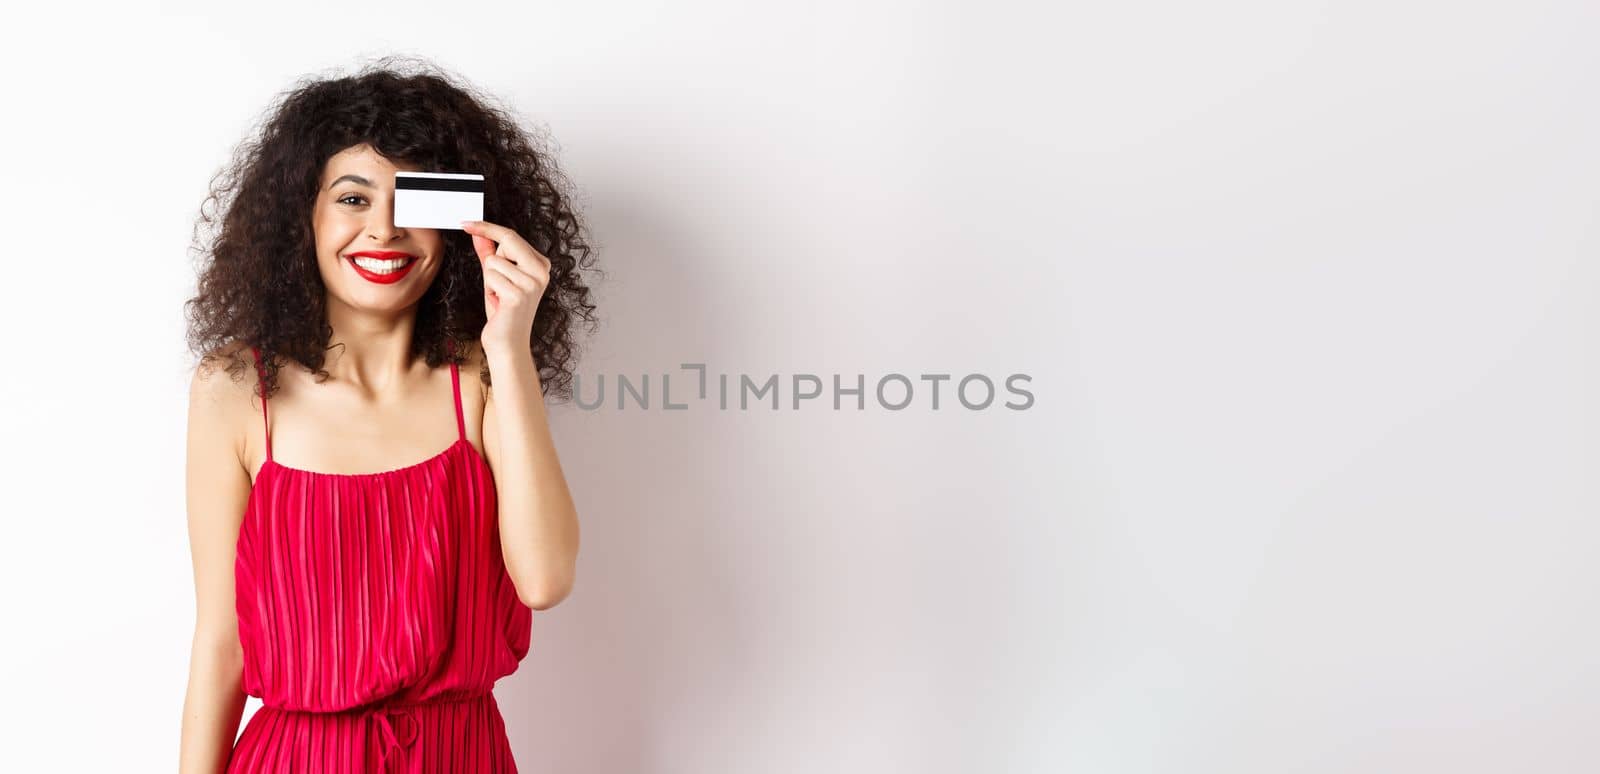 Image of elegant woman in red dress, showing plastic credit card and smiling at camera, standing over white background. Copy space